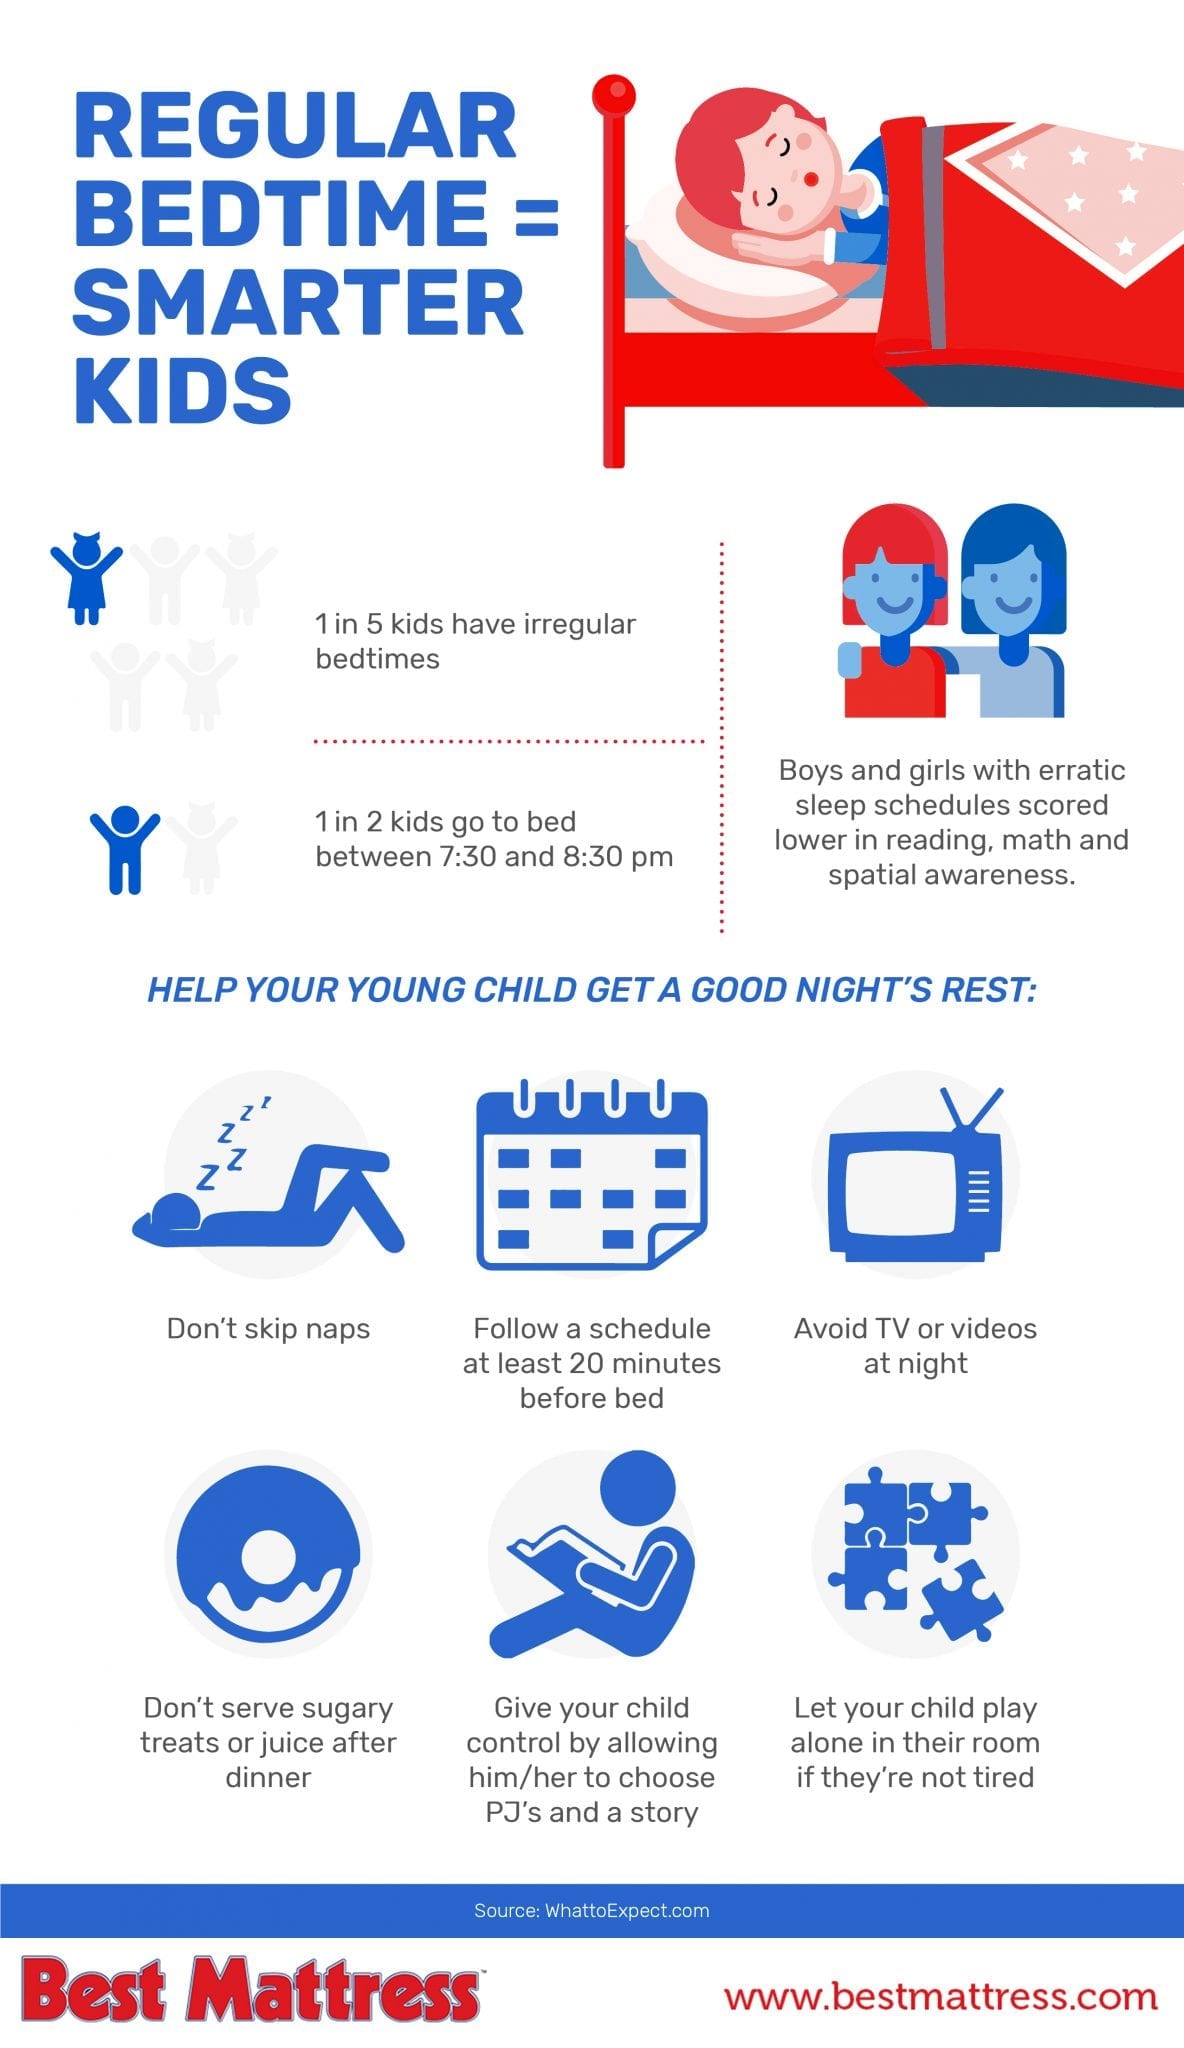 A regular bed time equals smarter kids infographic from Best Mattress in Las Vegas & St. George